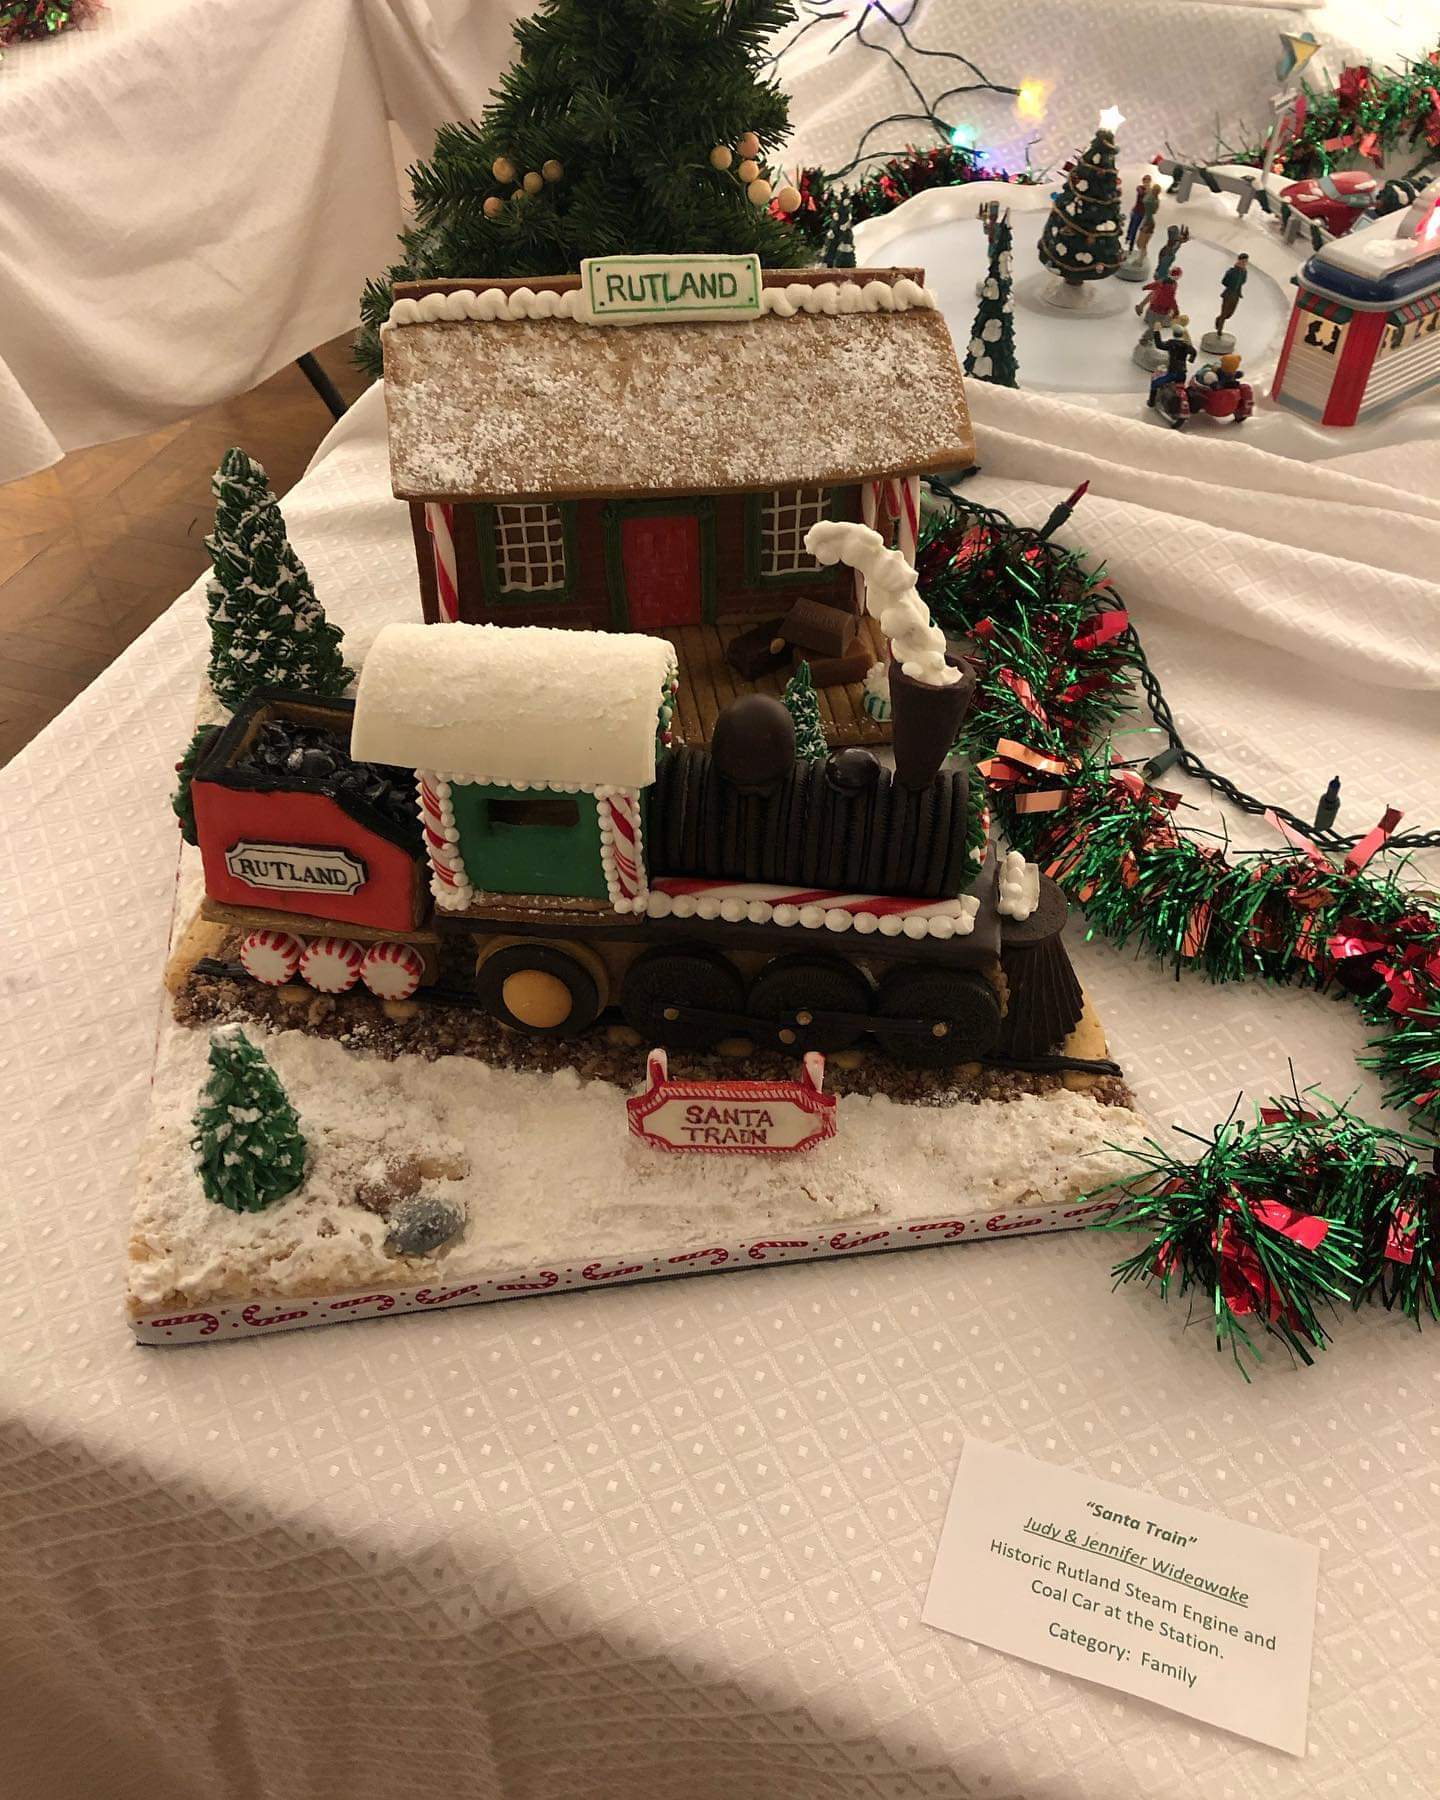 Gingerbread Silent Auction up to 4!